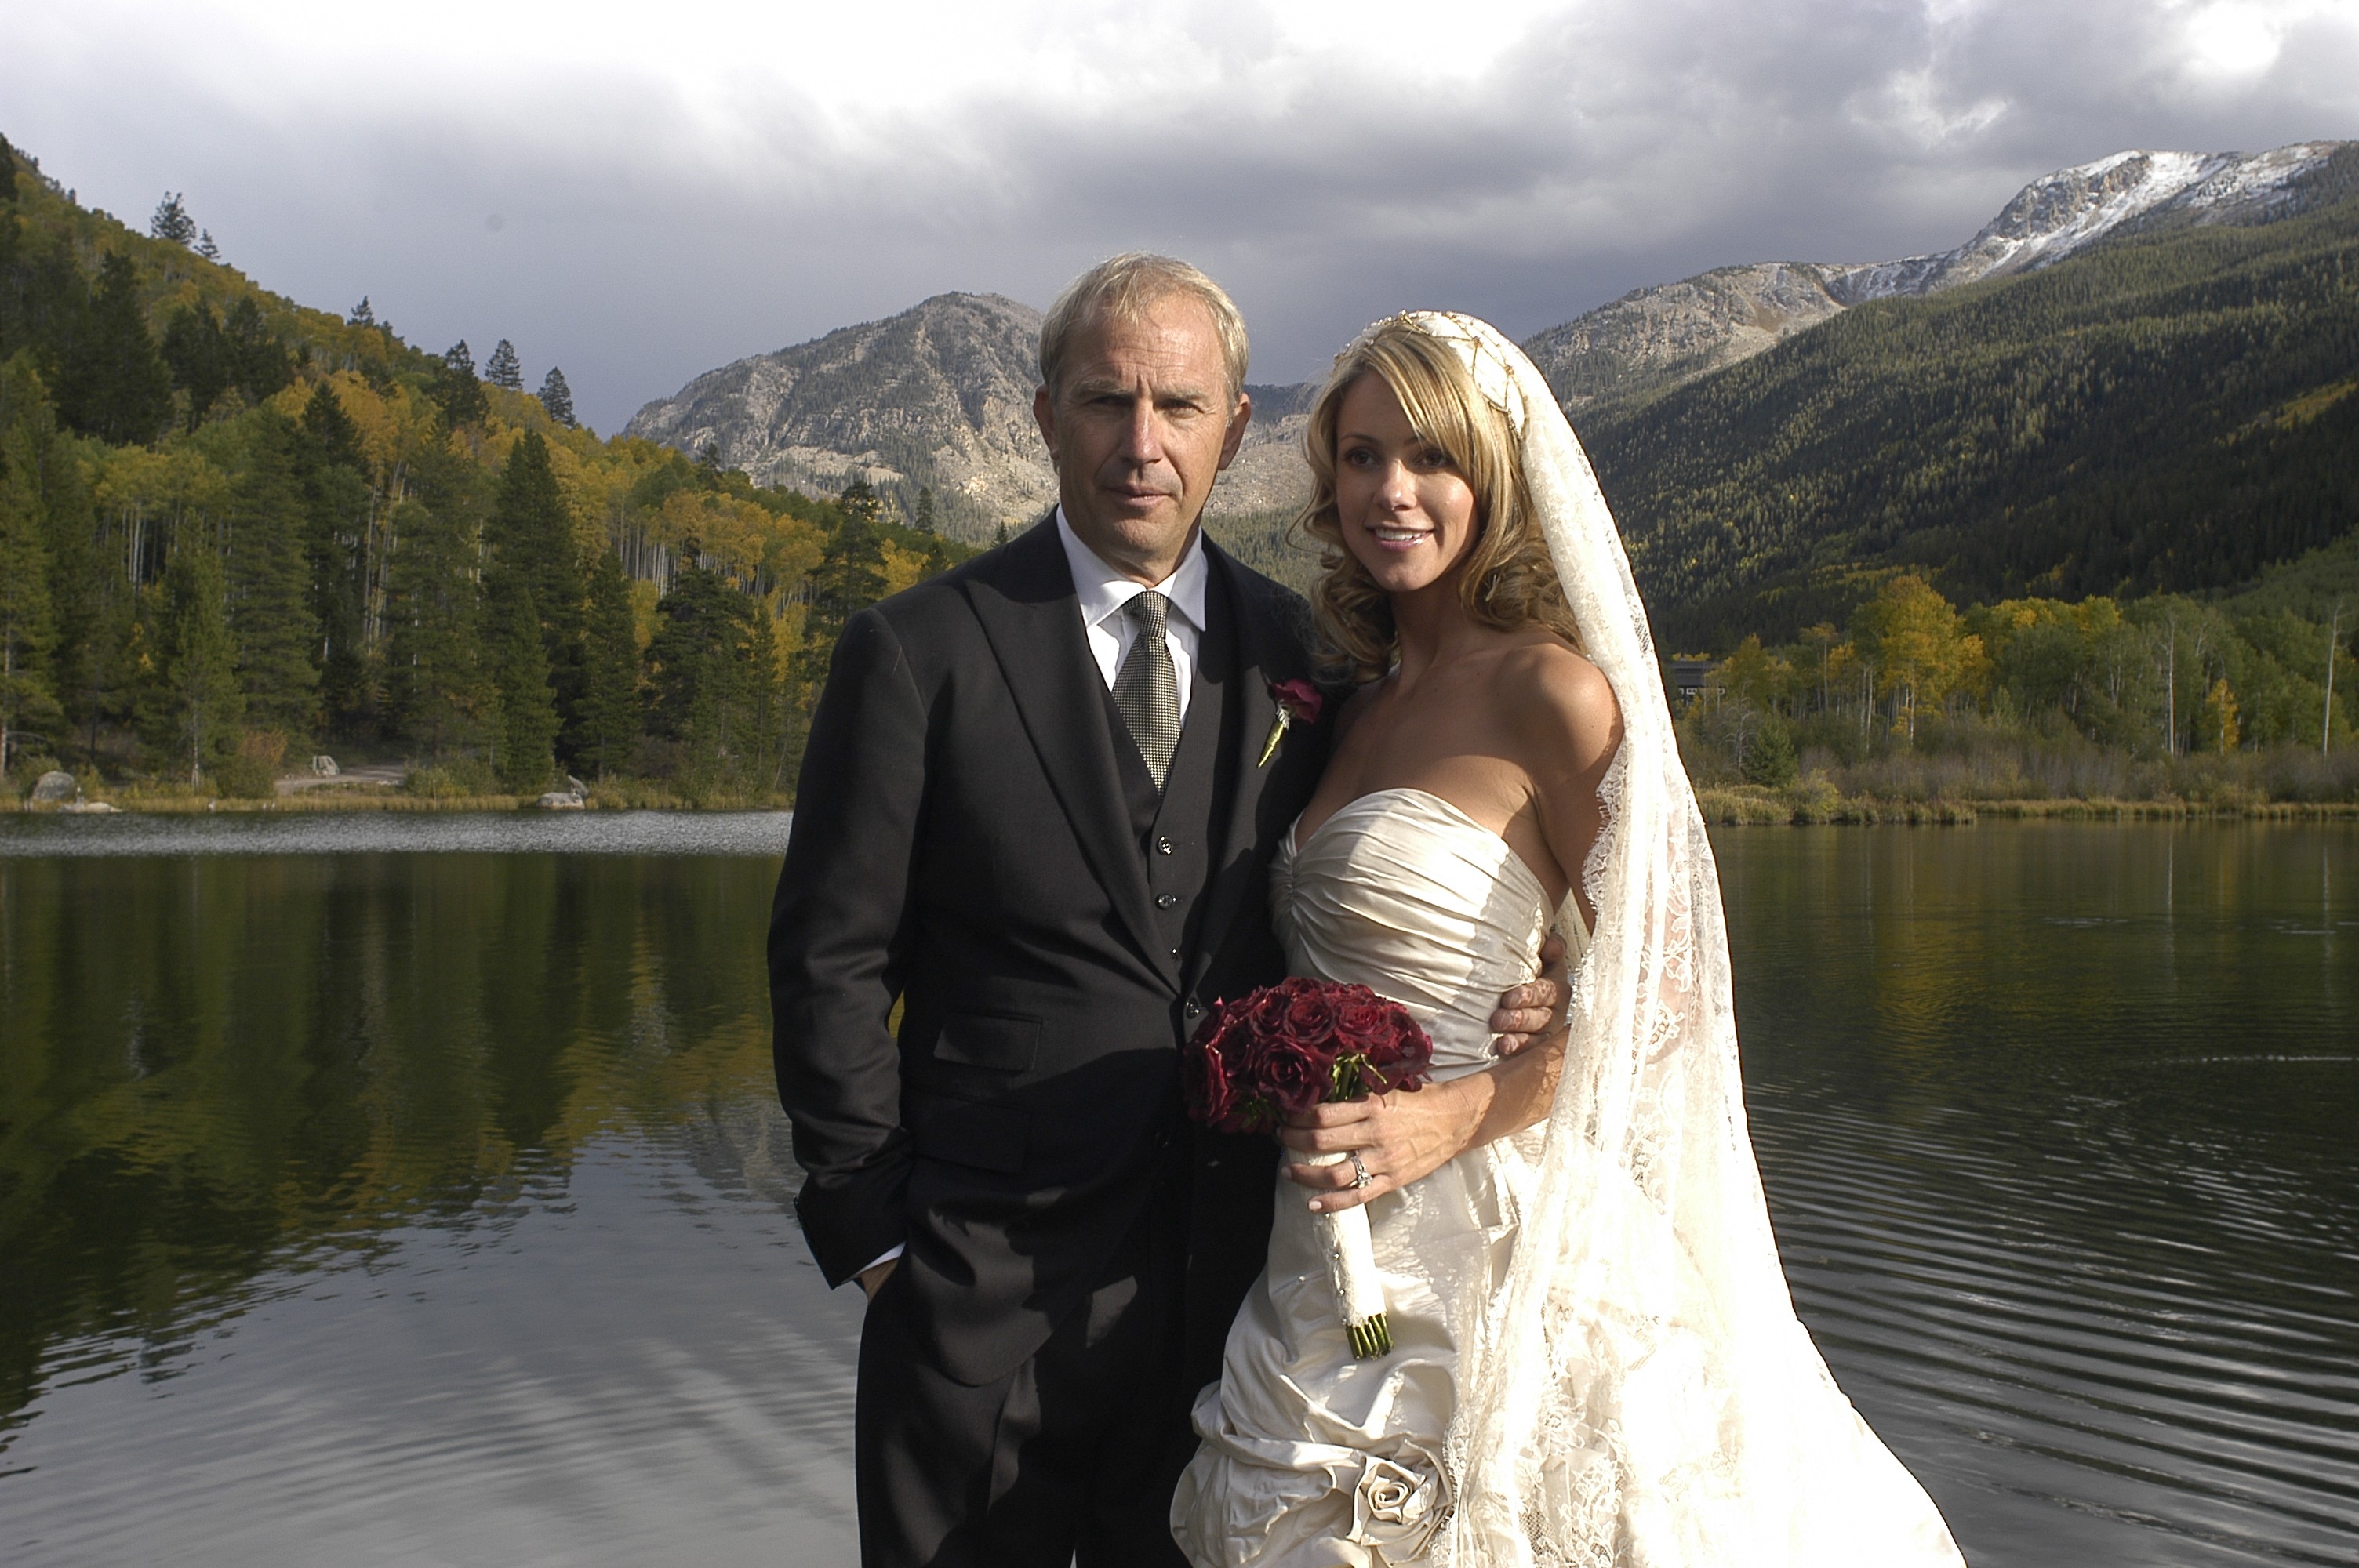 Kevin Costner with Christine Baumgartner during their private wedding at his ranch in September 25, 2004 in Aspen, Colorado. | Source: Getty Images